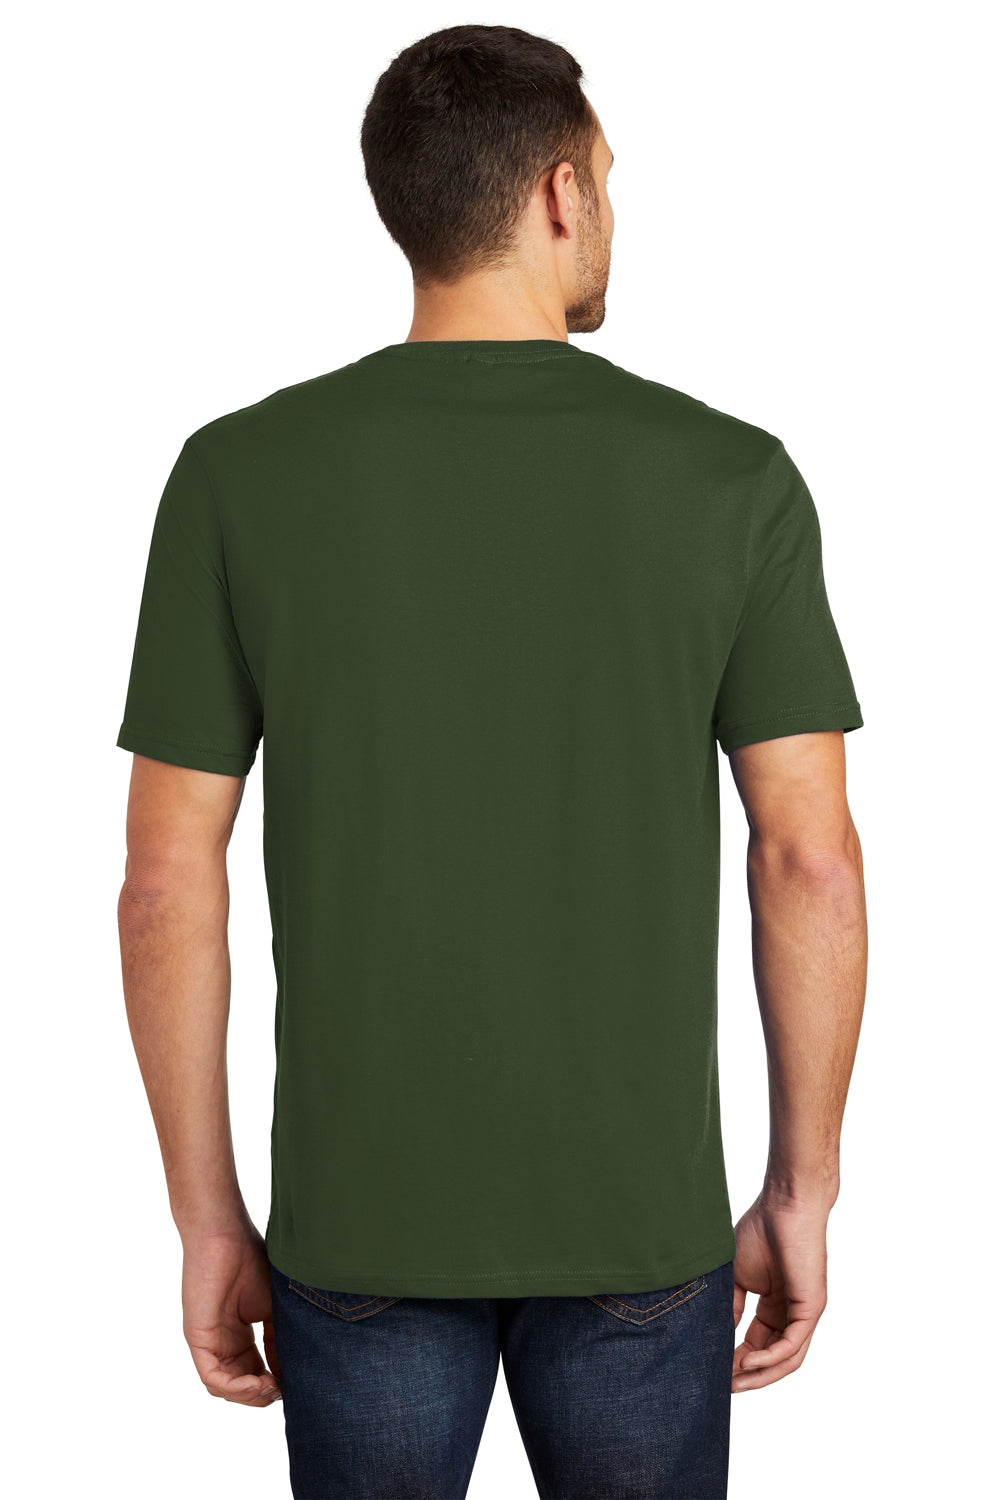 District DT104 Mens Perfect Weight Short Sleeve Crewneck T-Shirt Thyme Green Back